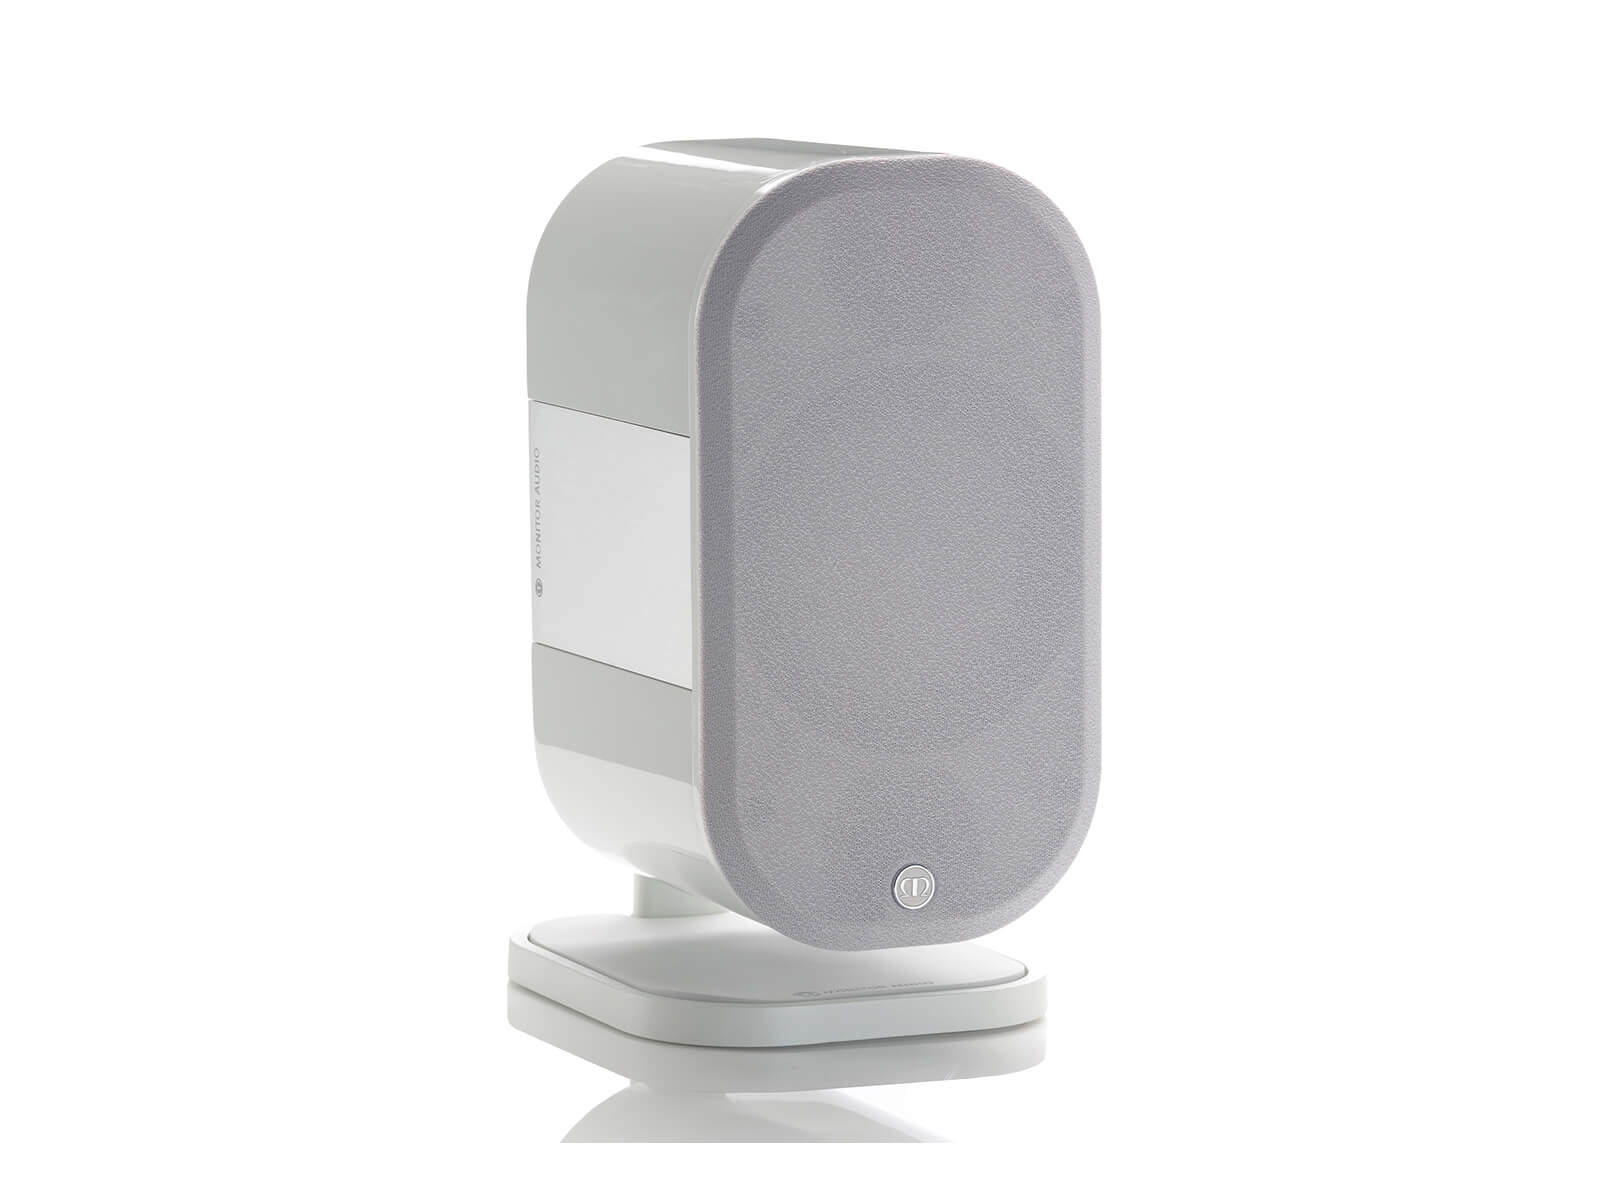 Apex A10, bookshelf speakers, featuring a grille and a metallic pearl white high gloss finish.